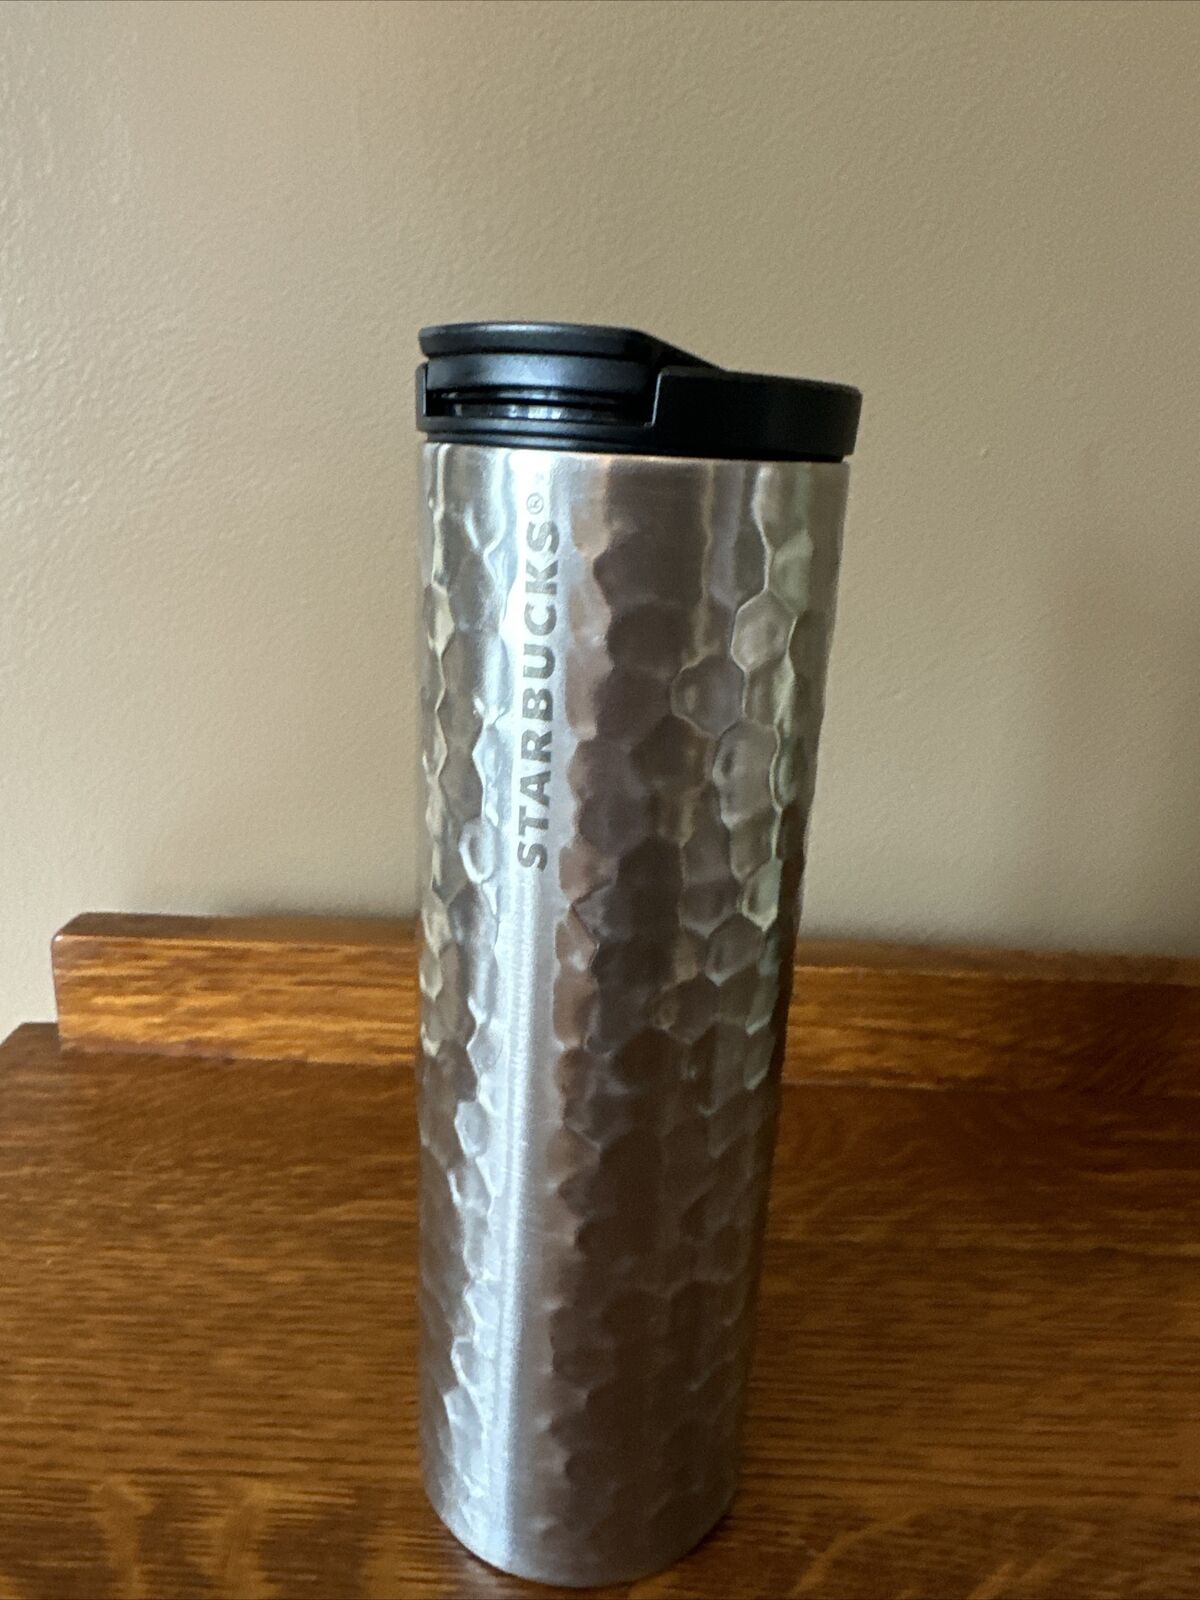 Starbucks 2012 Silver Hammered Stainless Steel Travel Tumbler 16oz Hot Cold